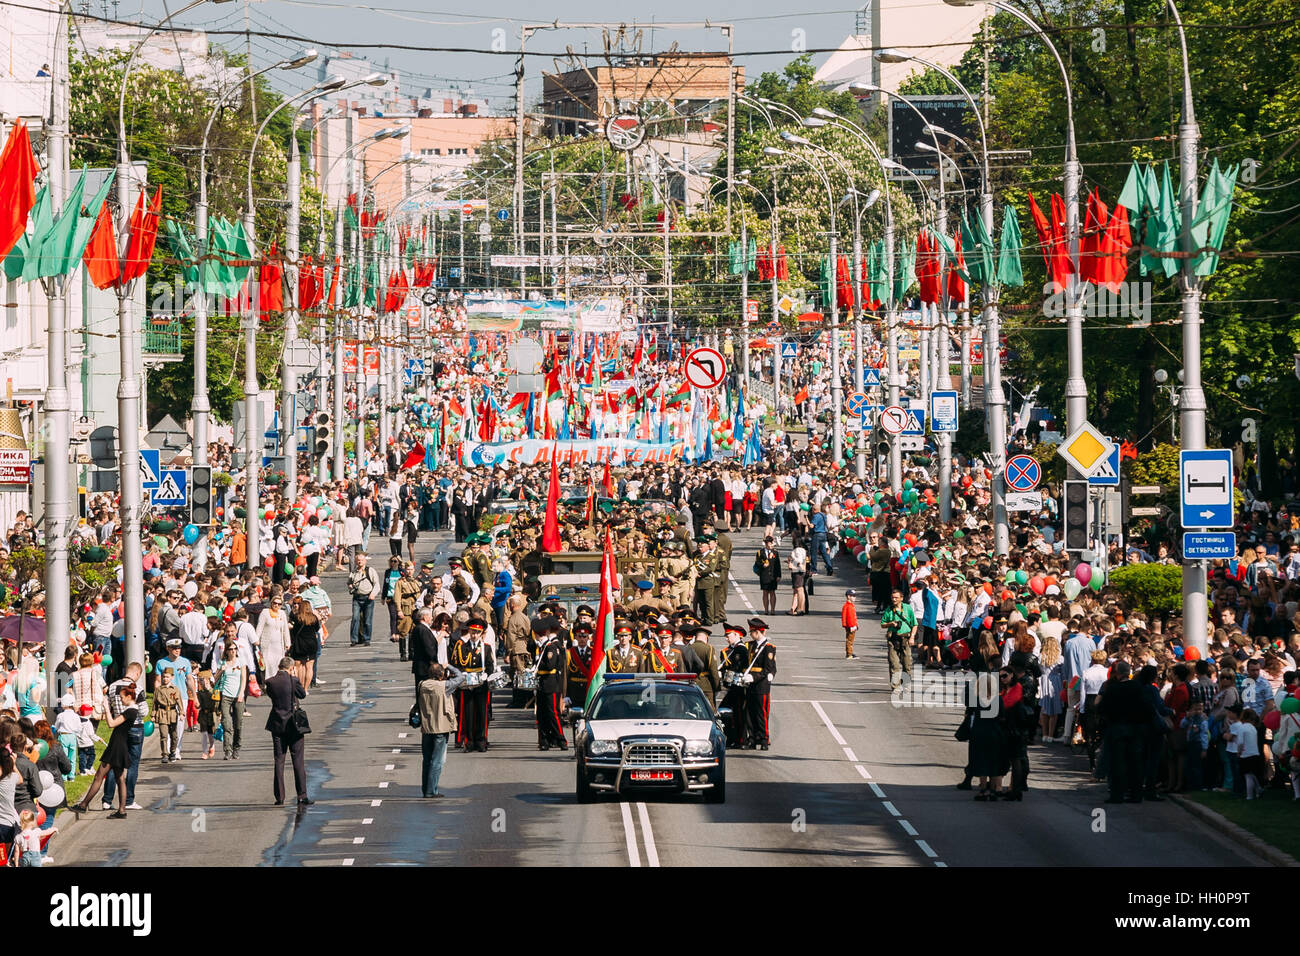 Gomel, Belarus - May 9, 2016: The Ceremonial Procession Of Parade. Military, Civilian People And Enginery On The Festive Decorated Street. Celebration Stock Photo